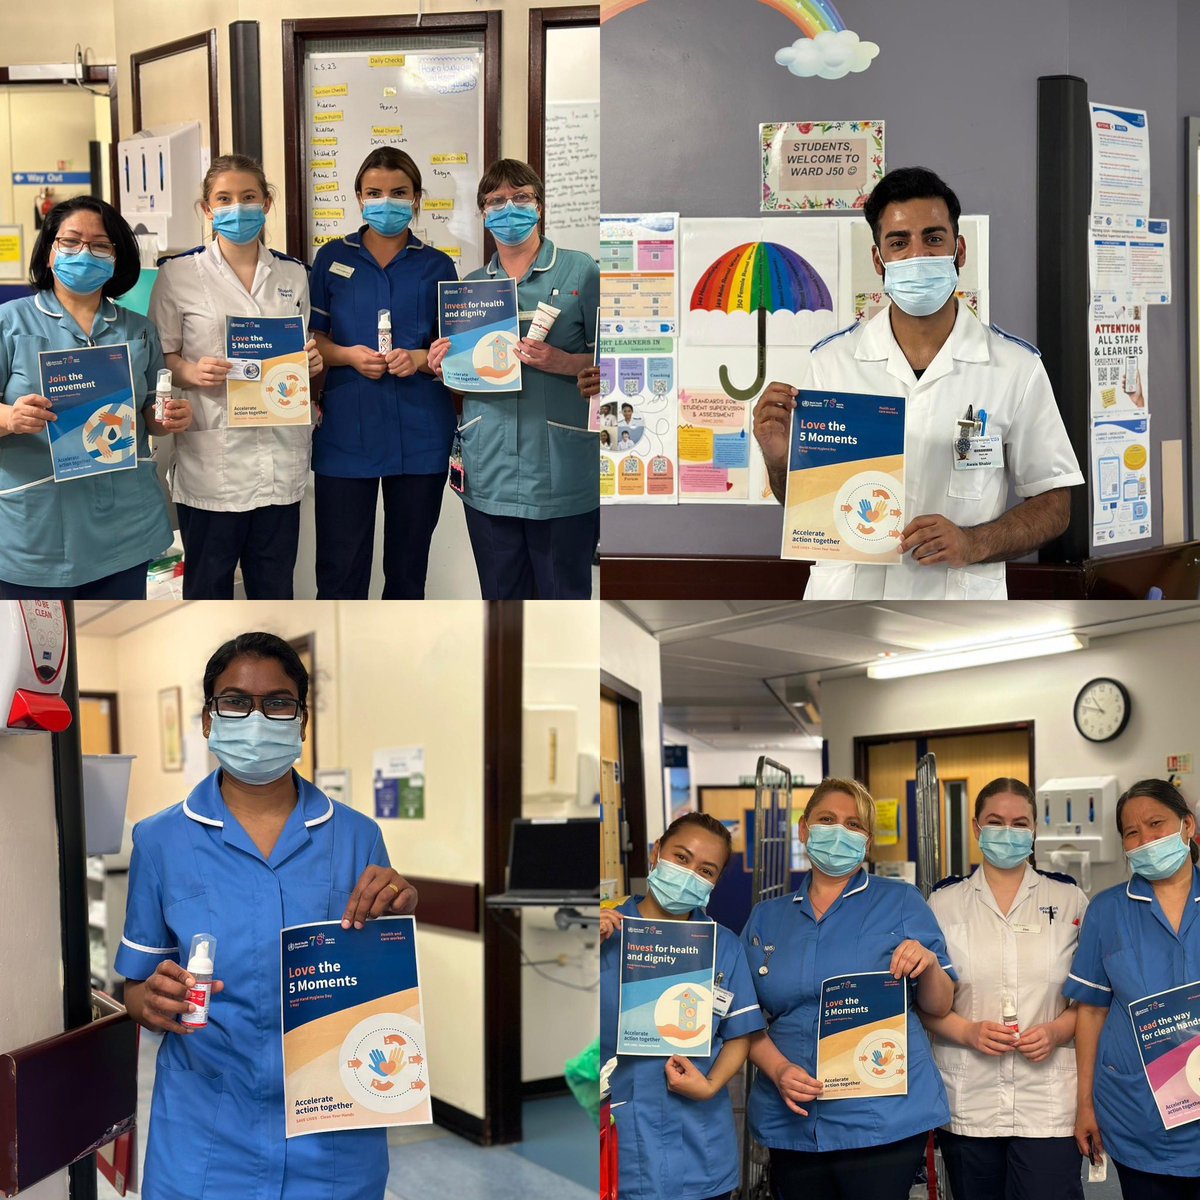 LTHT IPN’s out visiting the clinical areas promoting World Hand Hygiene Day. We are loving the 5 moments. @LeedsHospitals @DidierPittet @IPS_Infection @LTHTAMS @IPS_Yorkshire #WorldHandHygieneDay2023 #HandHygiene #CleanHands